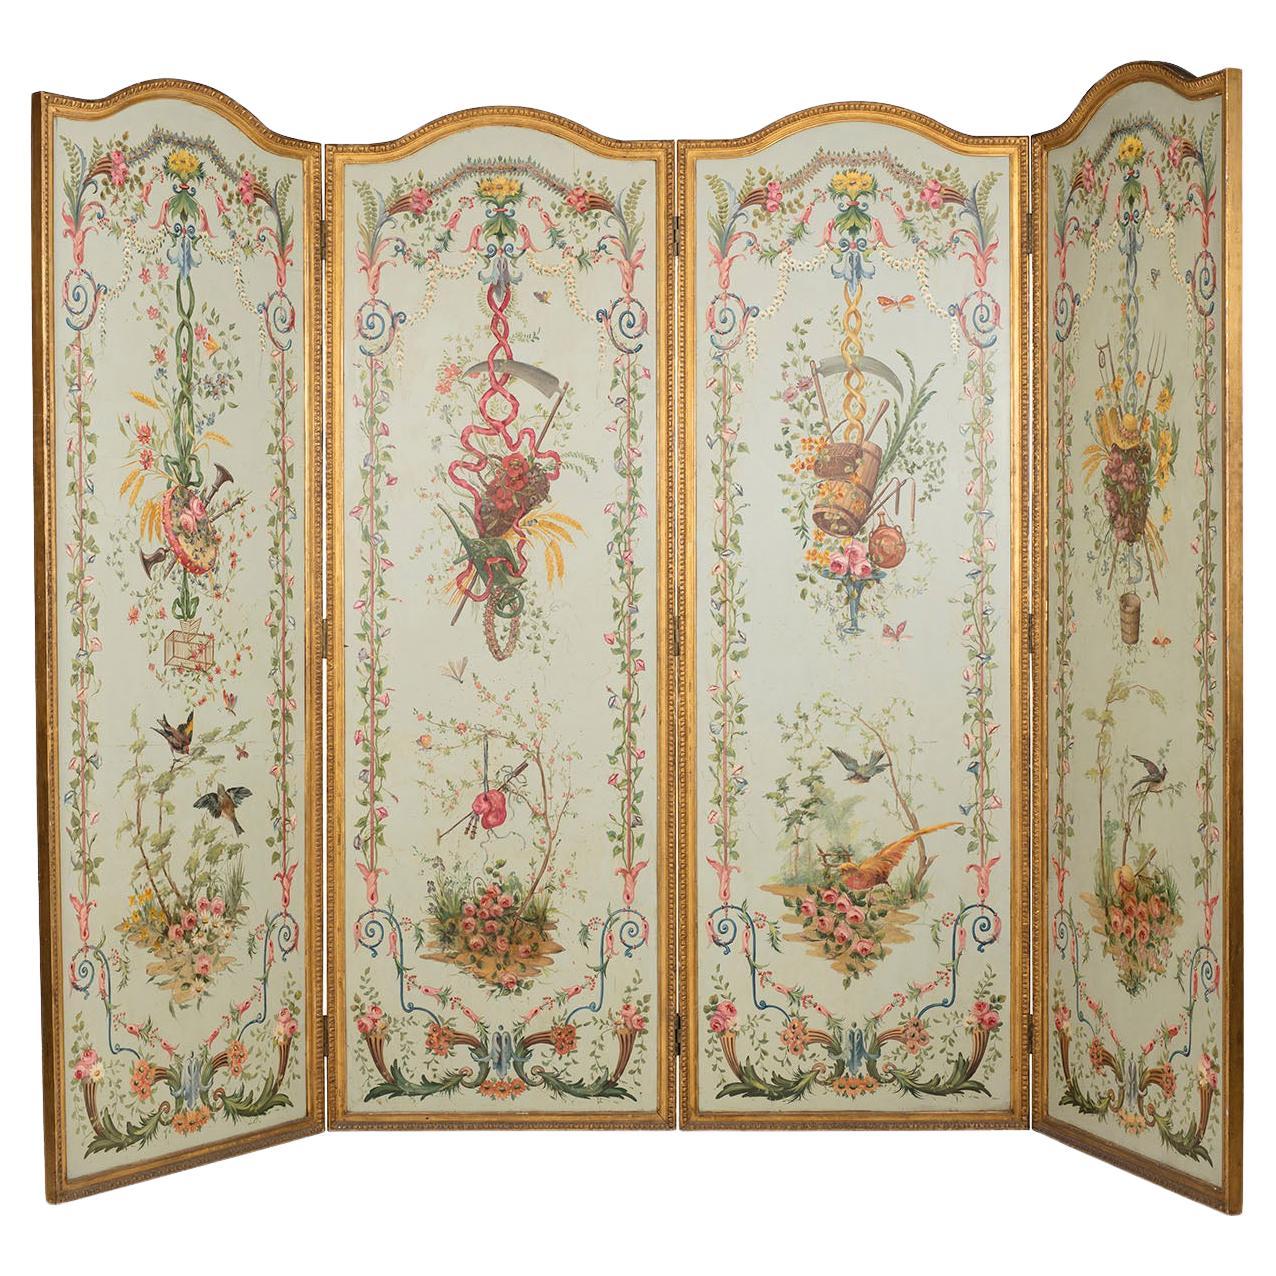 magnificent 4 Panel Screen Painted on Wood Depicting the 4 Saisons For Sale